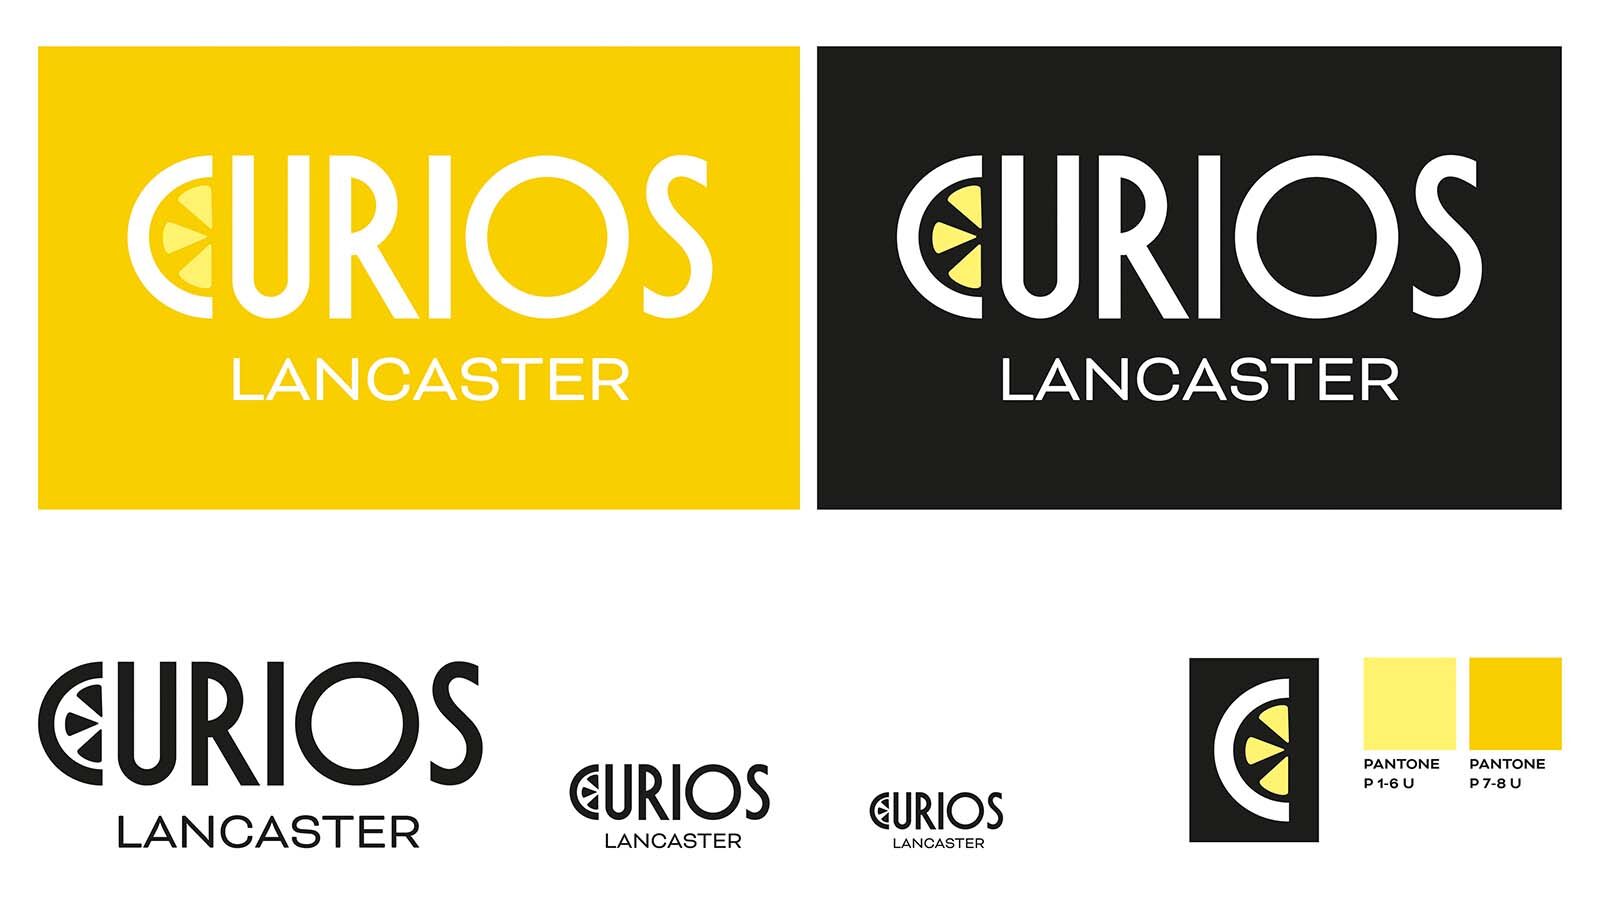 Brand Board for Curios Lancaster